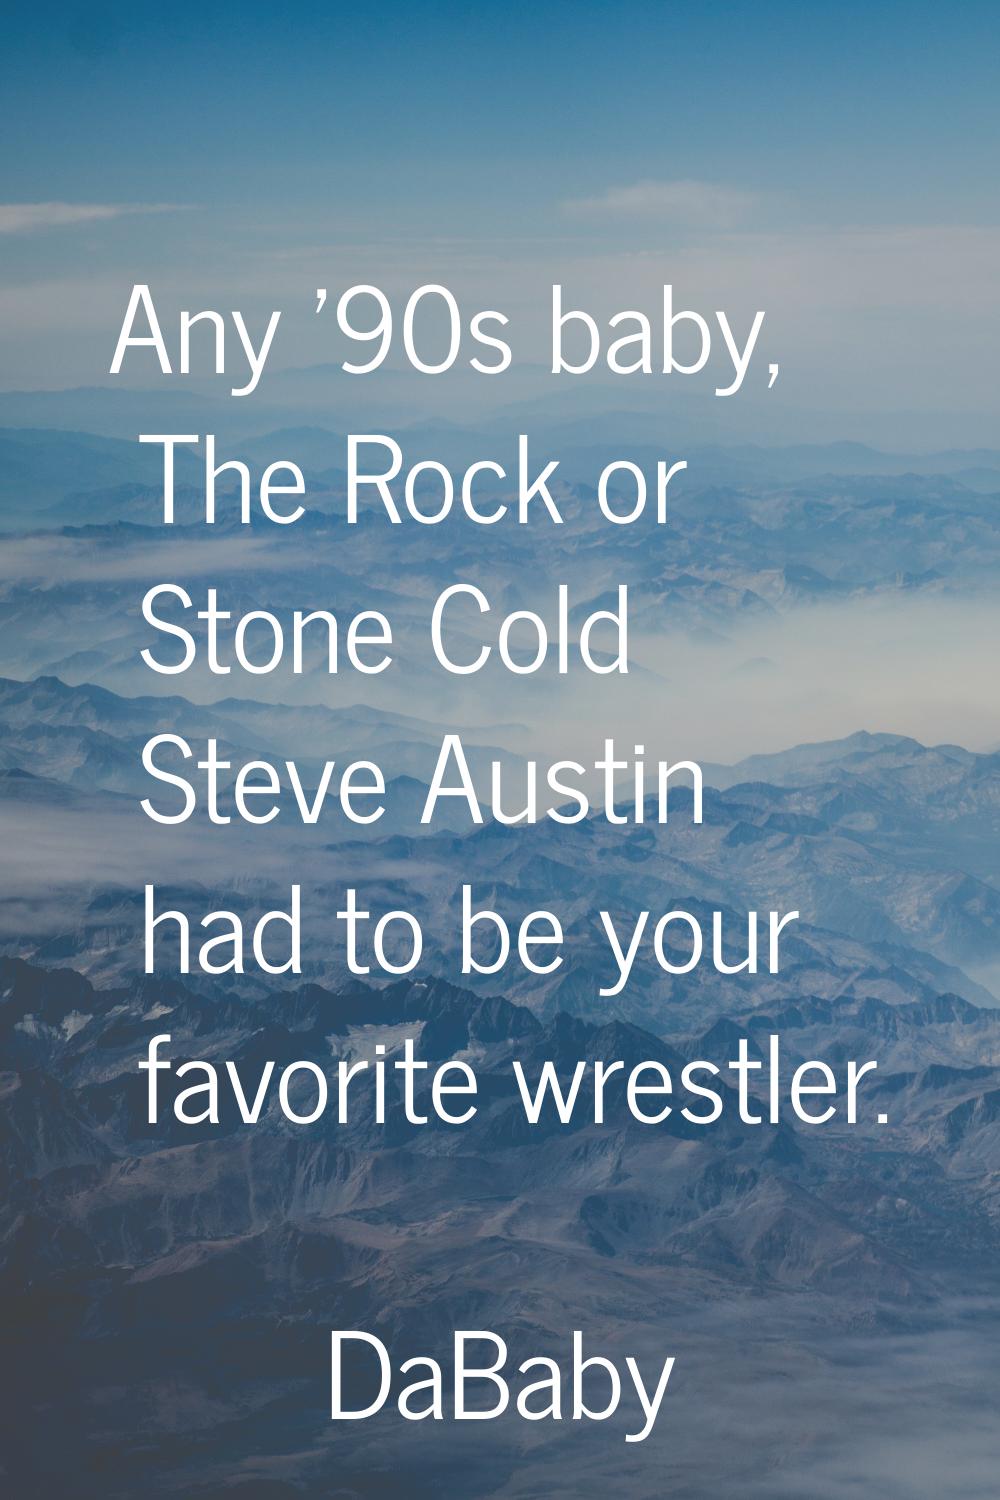 Any '90s baby, The Rock or Stone Cold Steve Austin had to be your favorite wrestler.